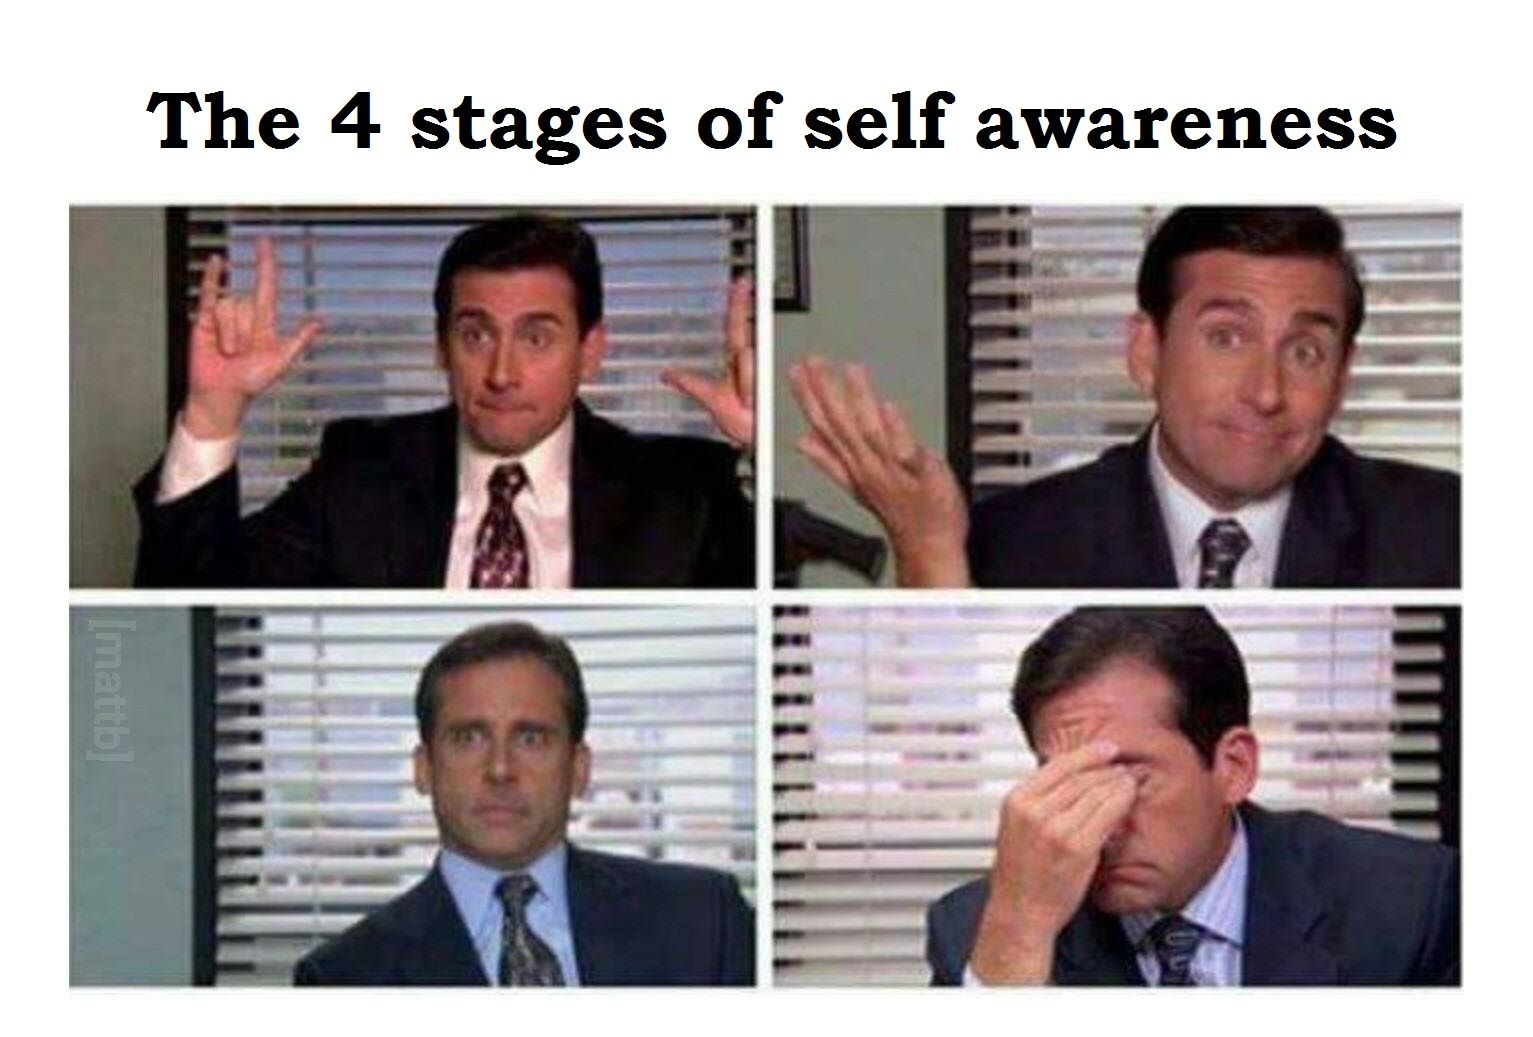 Its kind of like the 4 stages of being on hugelol